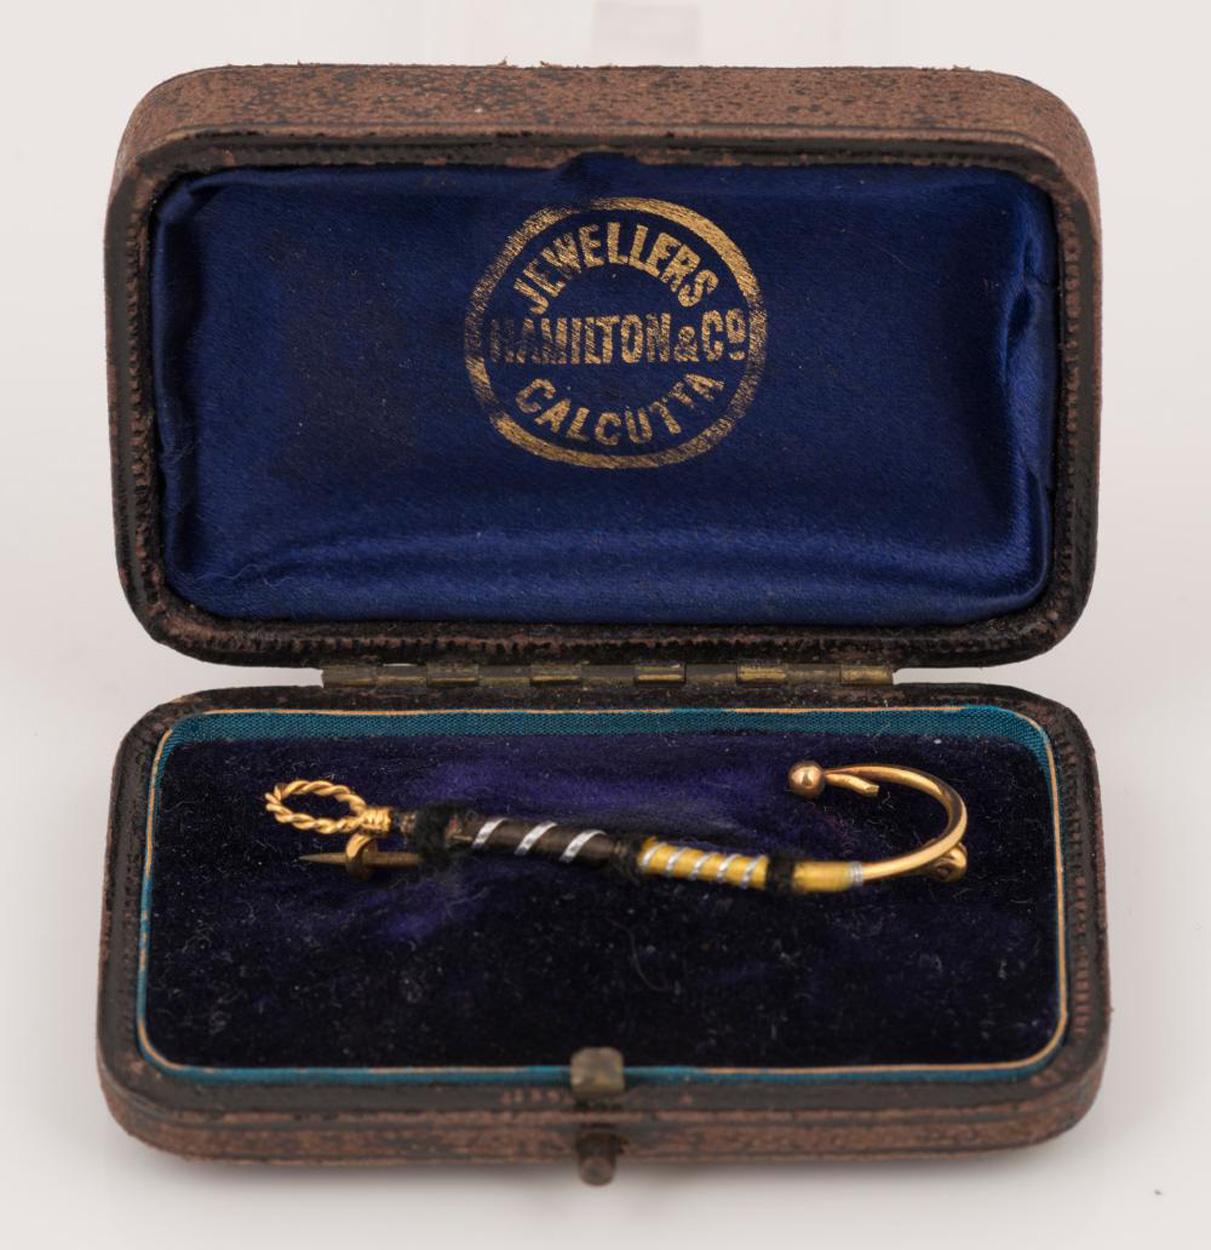 A rare and desirable 9 ct gold brooch in the form of a tied fly fisherman's lure, retailed by Hamilton & Co, Calcutta,  1.7 grams.

Robert Hamilton (1772-1848) arrived in India and started work in Calcutta in 1808. He opened his Jewellery and